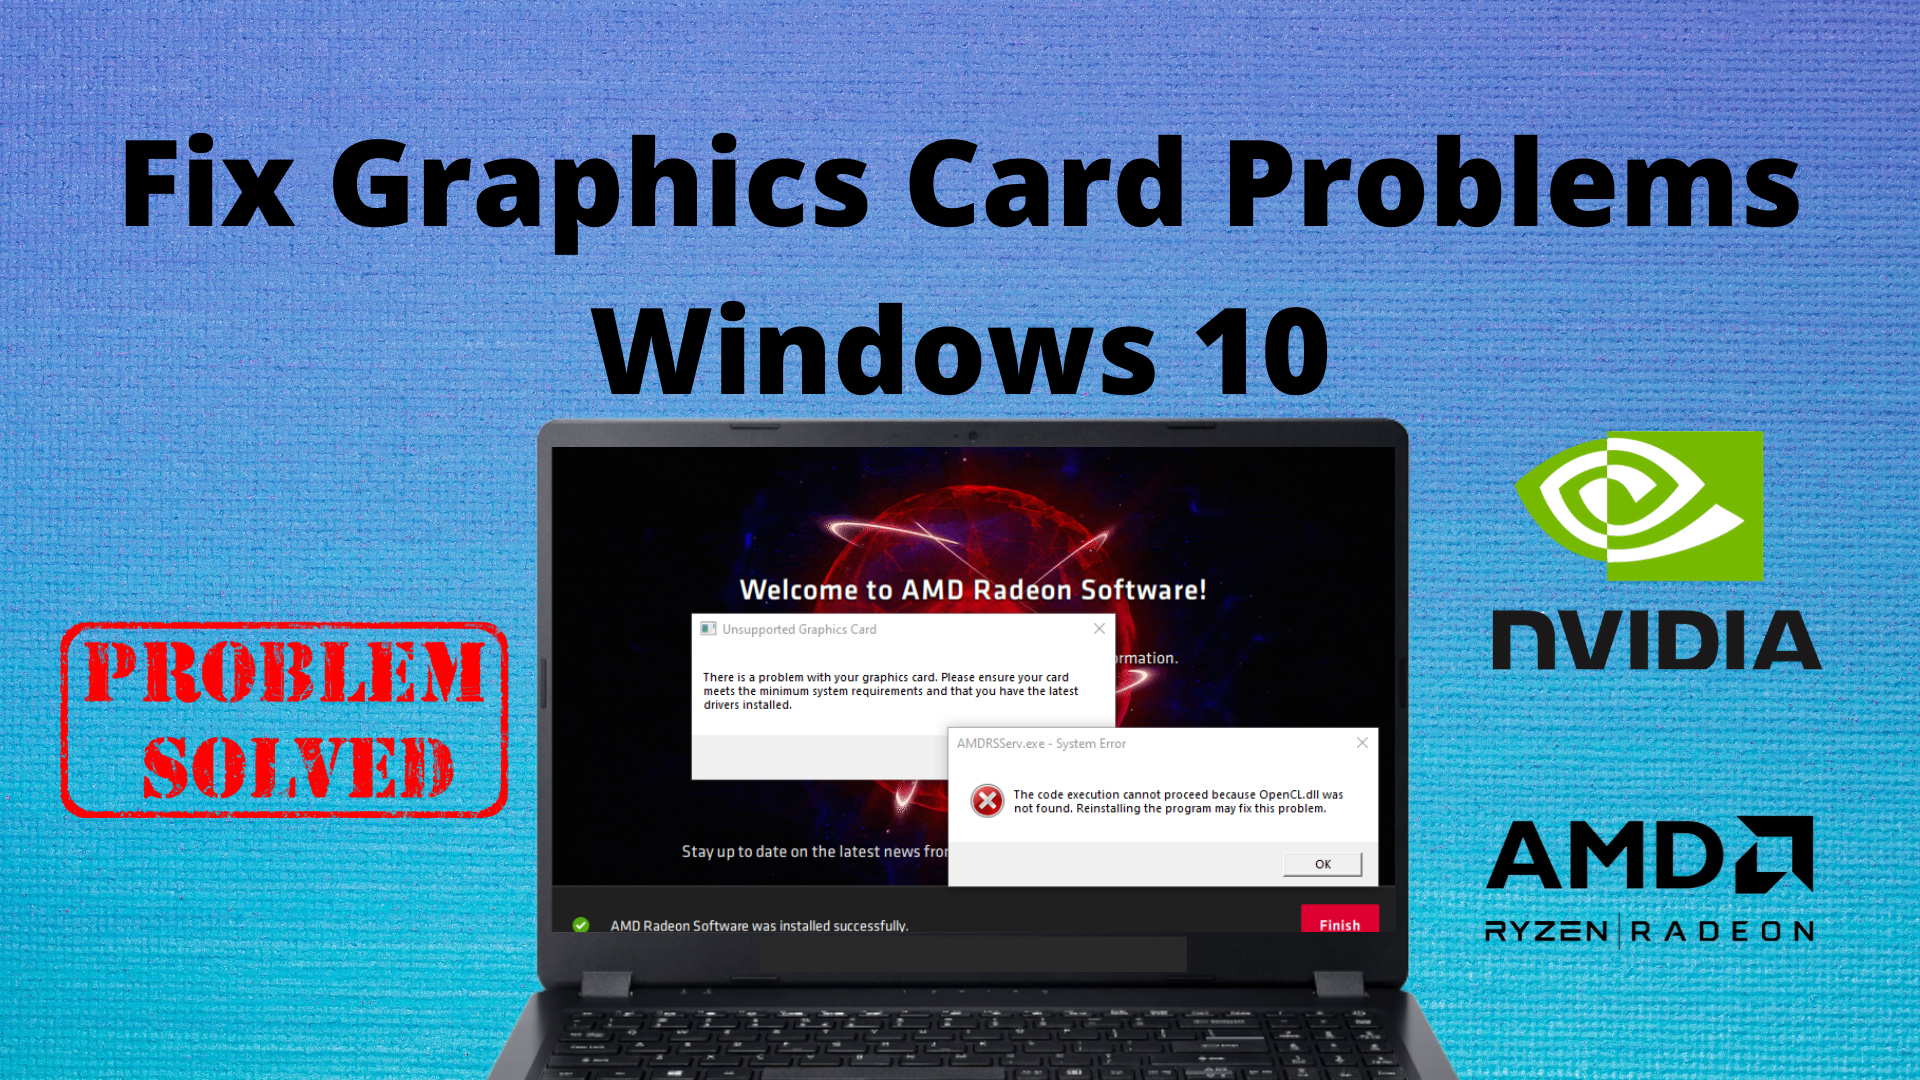 How to Fix Graphics Card Problems Windows 10